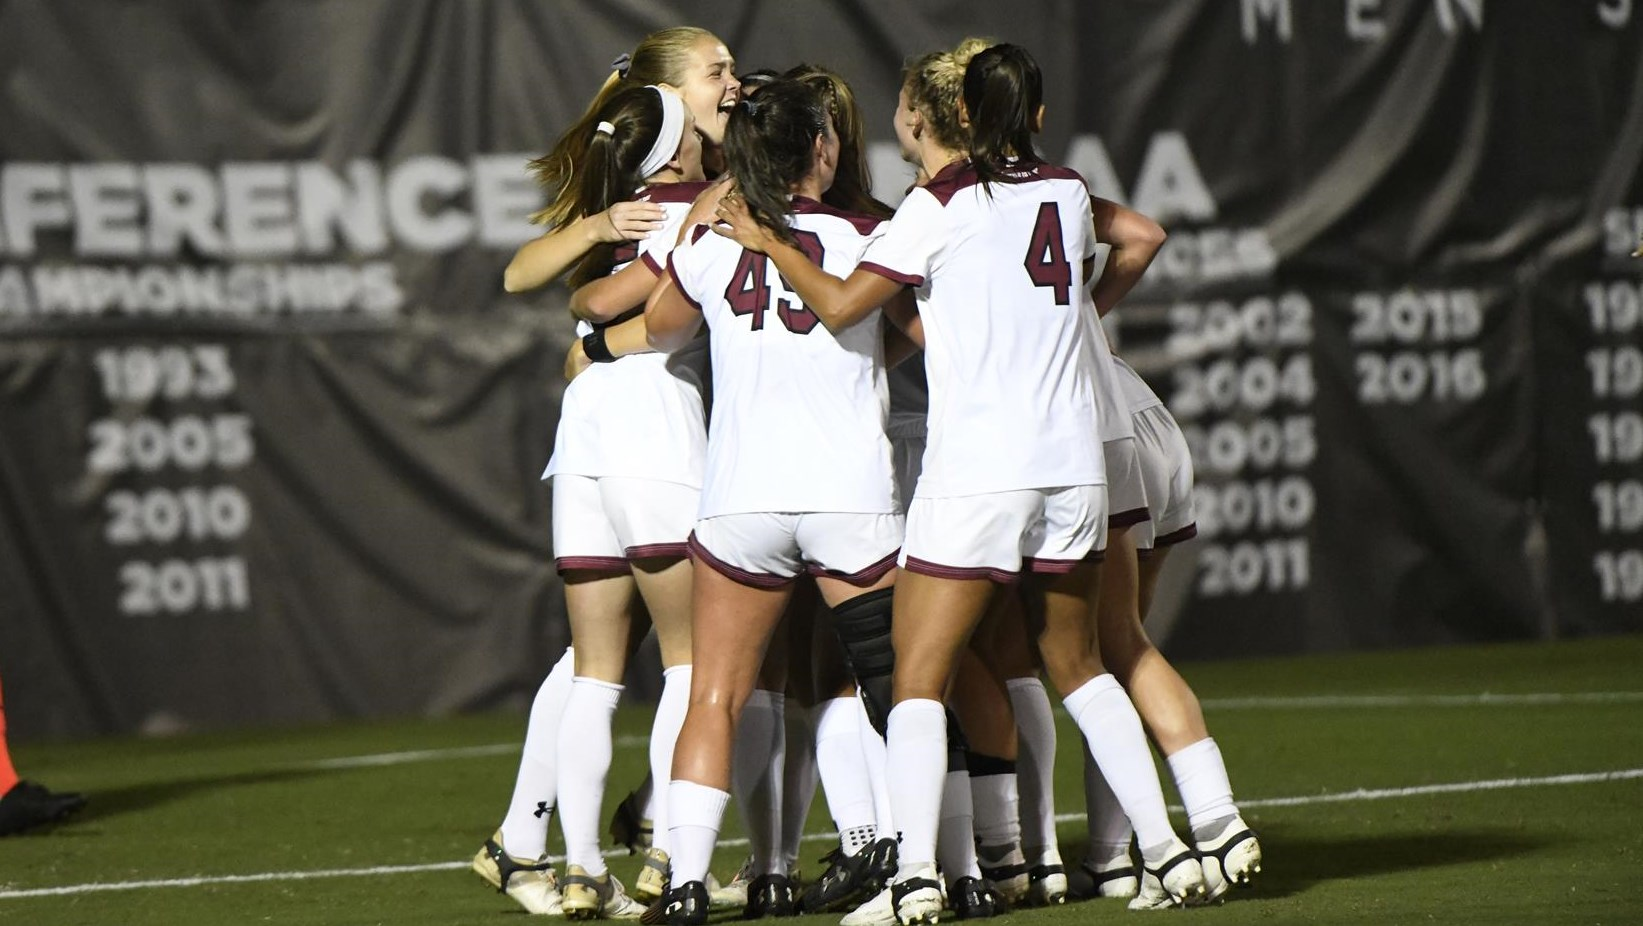 Gamecocks Travel to UNC for NCAA Tournament First Round